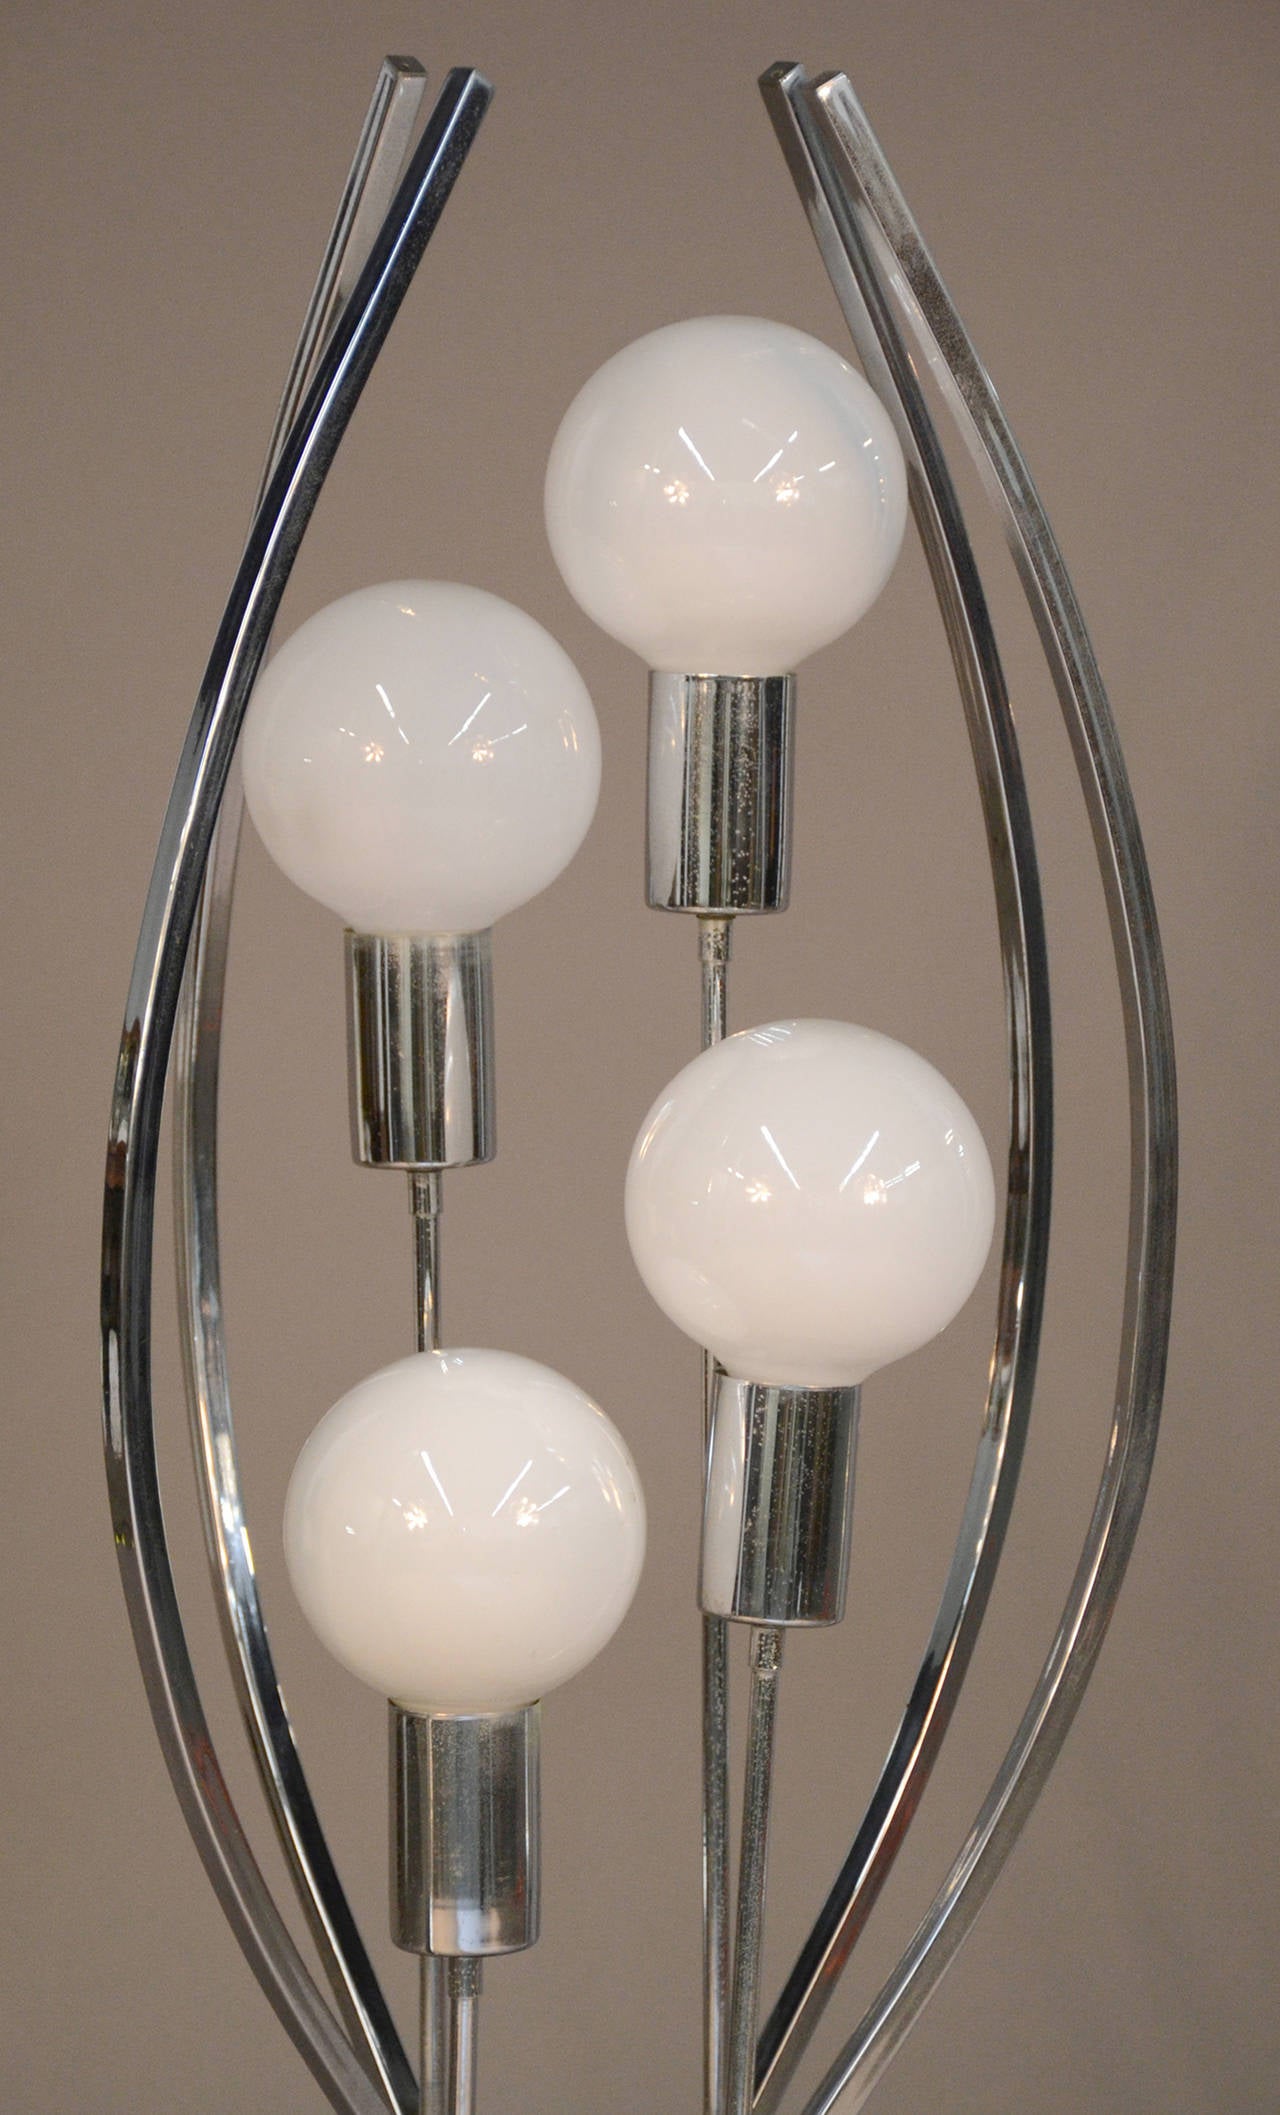 Modern Italian Sculptural Chrome Lamp In Good Condition For Sale In Bridport, CT